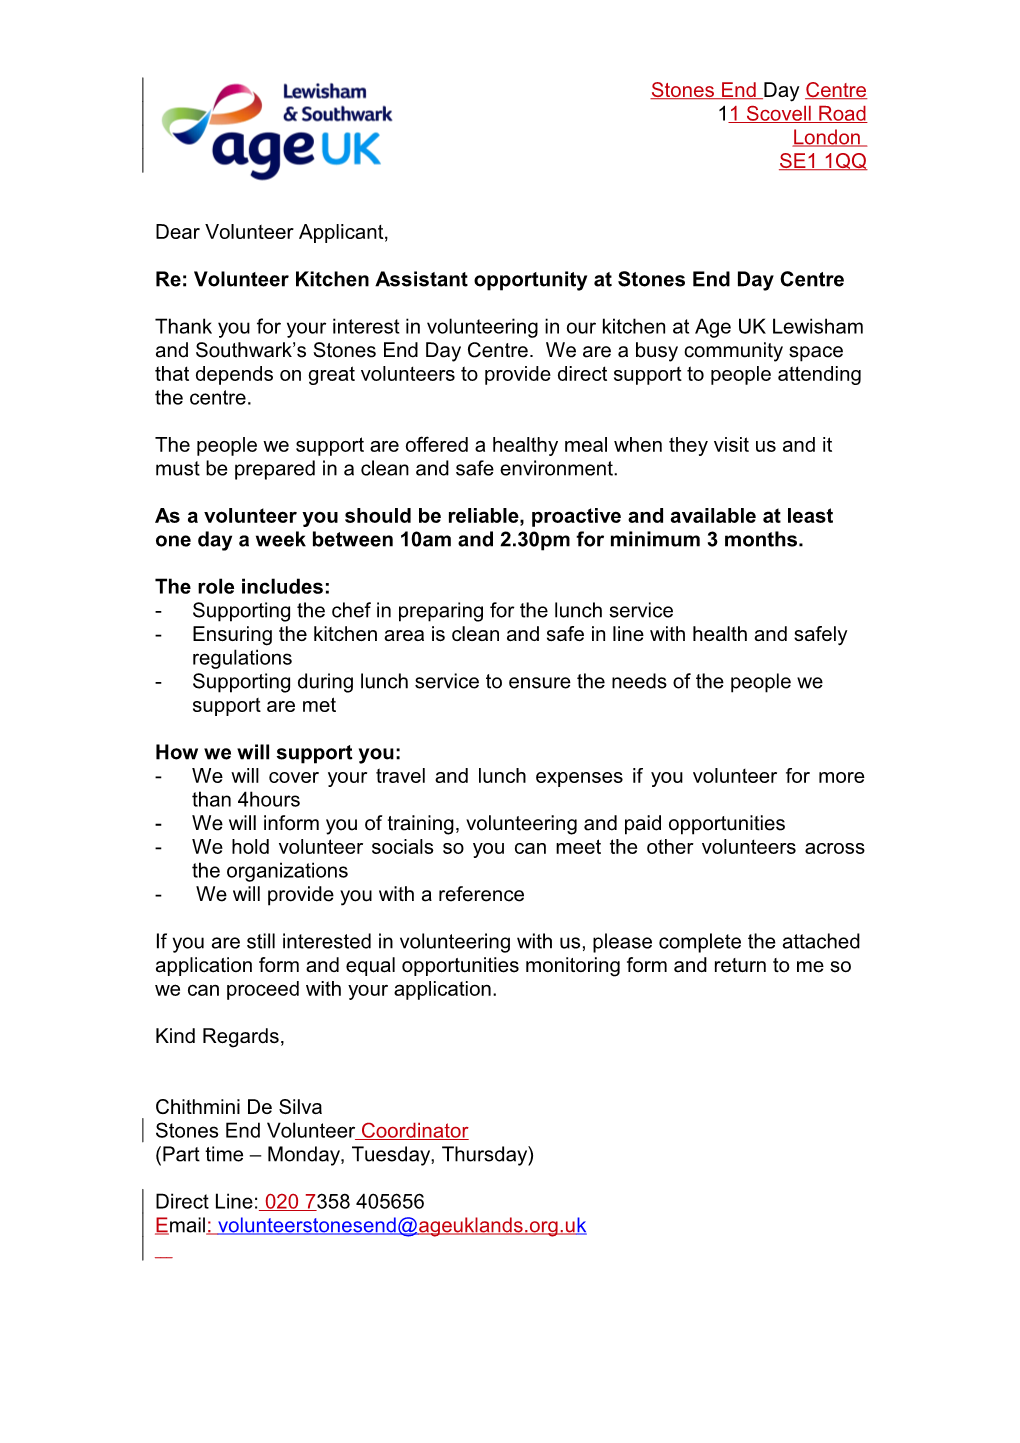 Re: Volunteer Kitchen Assistant Opportunity at Stones End Day Centre